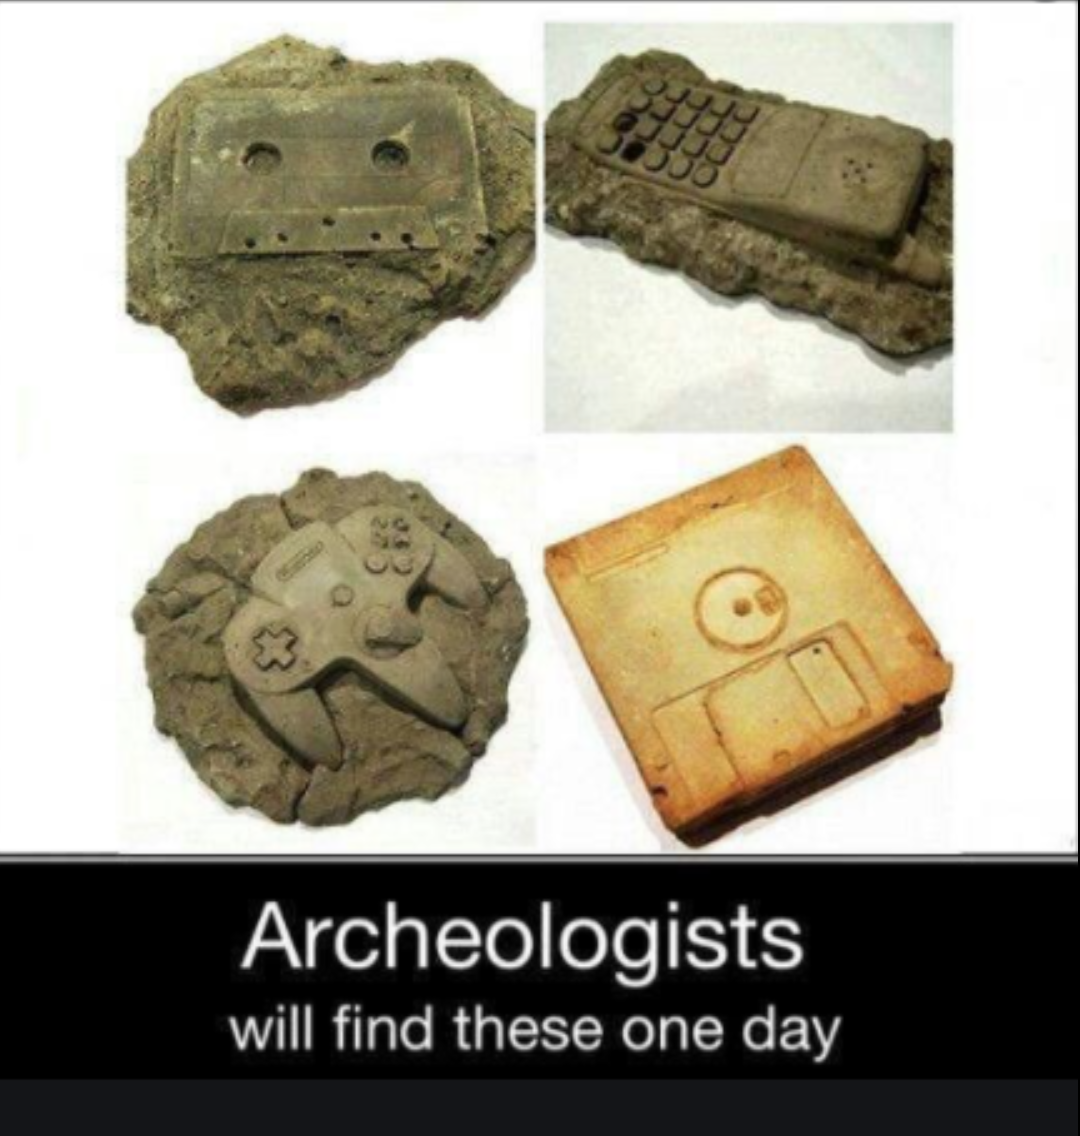 funny gaming memes - artifact - Archeologists will find these one day